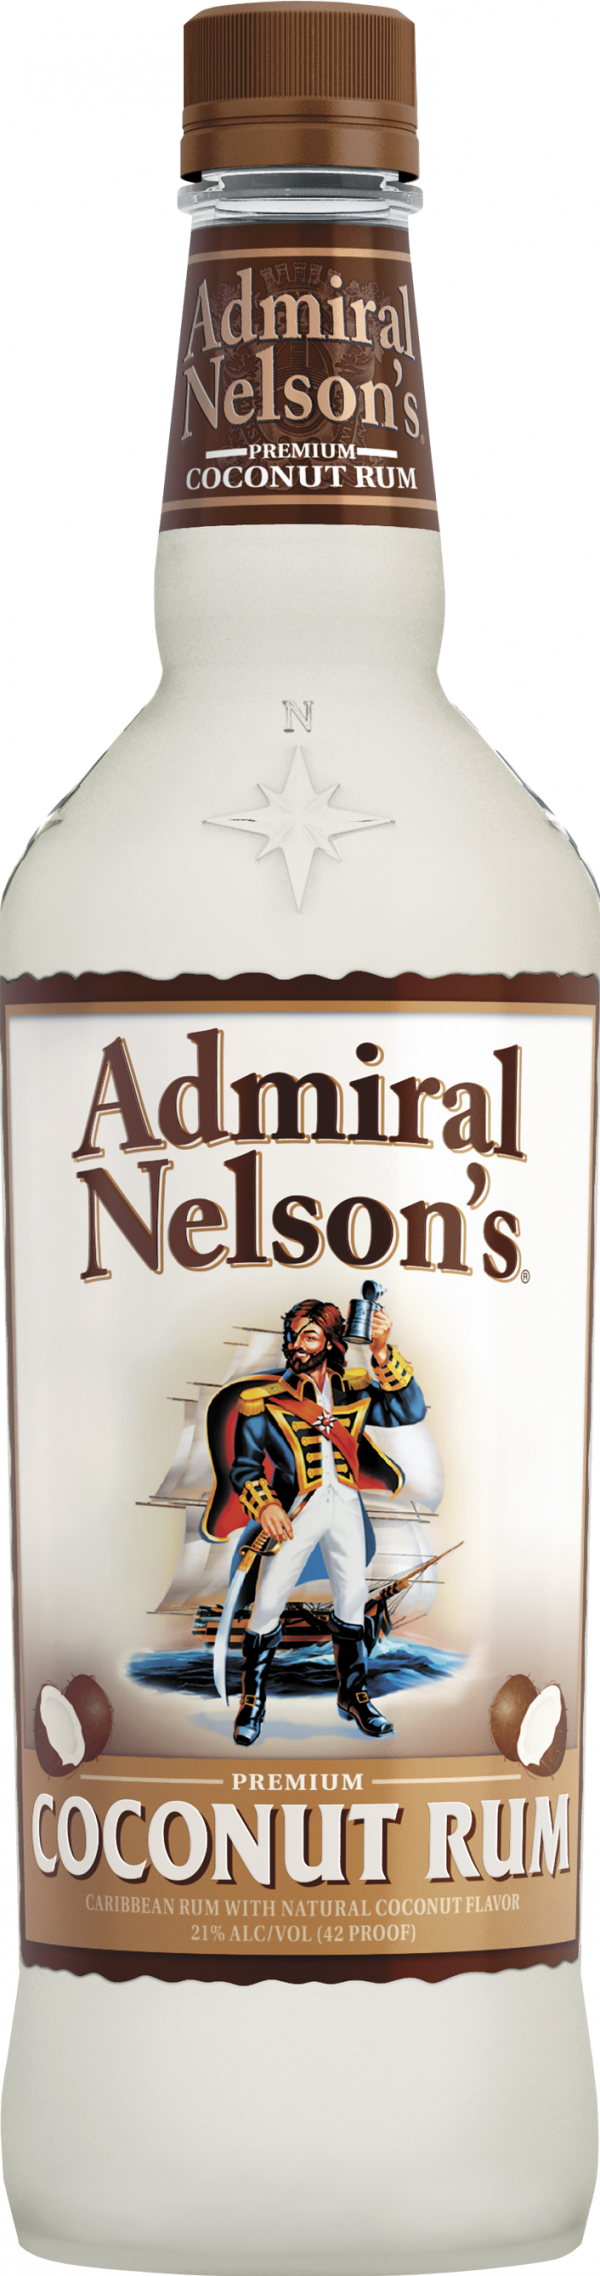 Zoom to enlarge the Admiral Nelson’s Coconut Rum